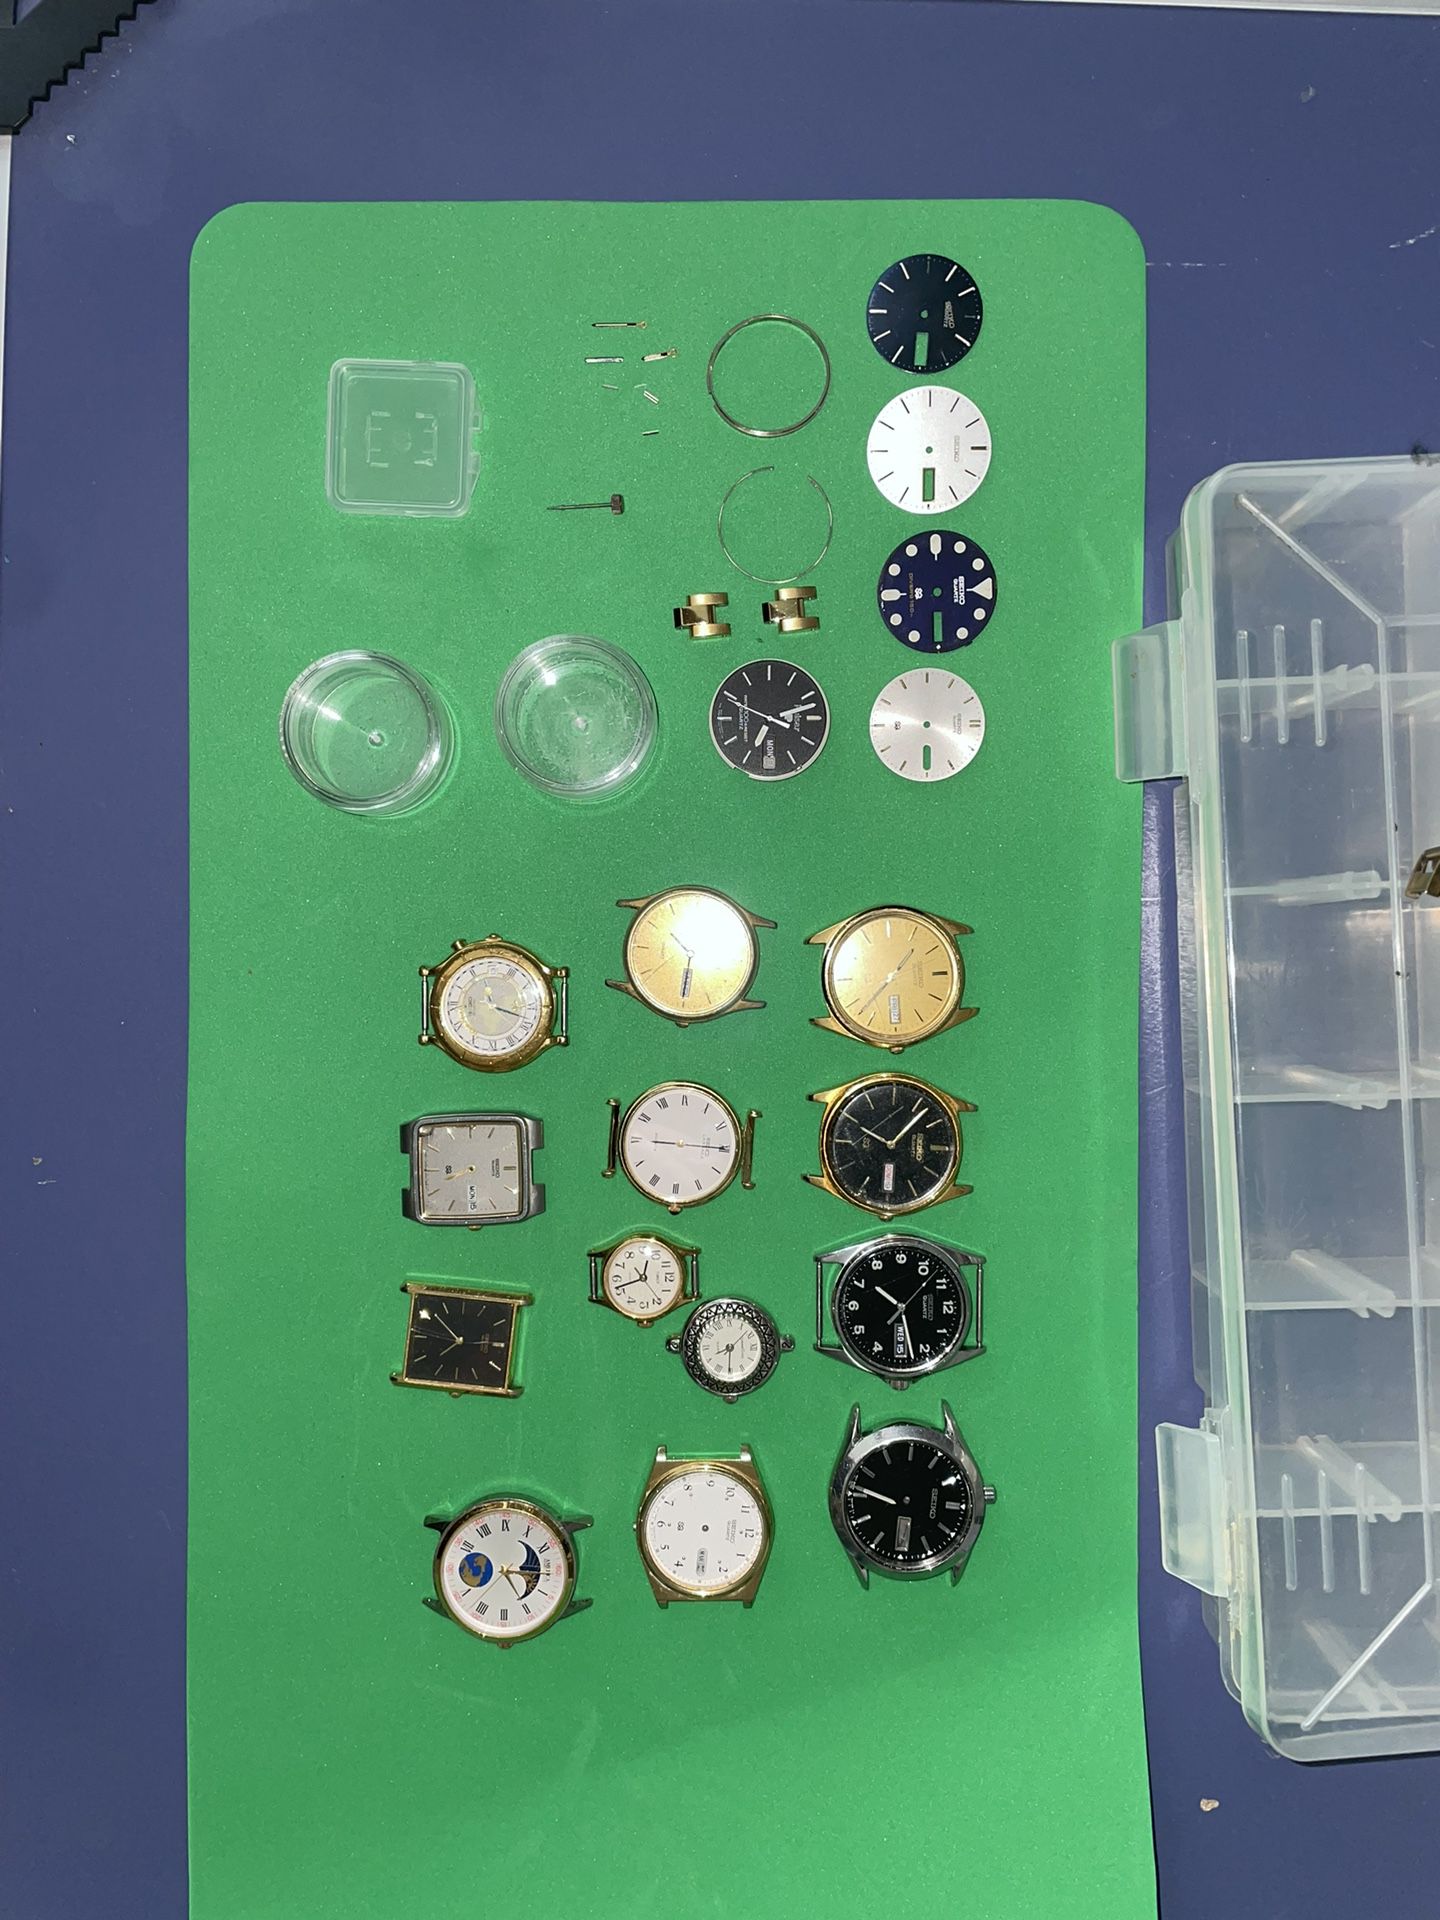 Watch Parts For Sale - Seiko, Pulsar, Timex